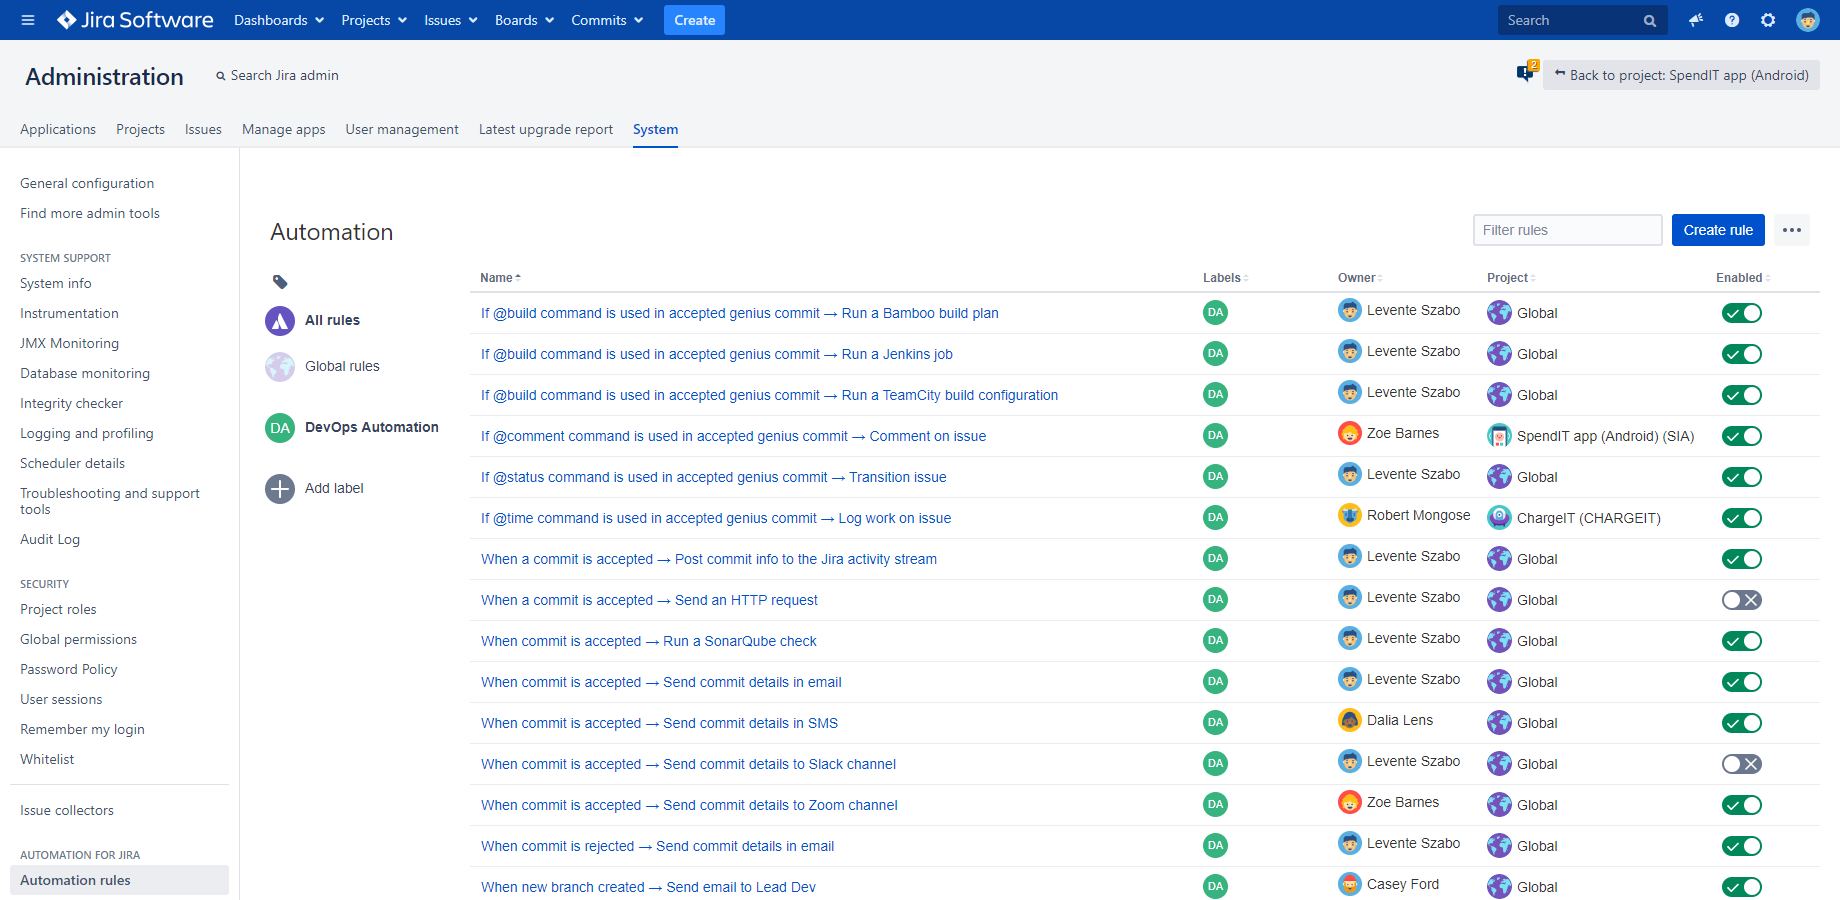 DevOps focused automation rules in Automation for Jira